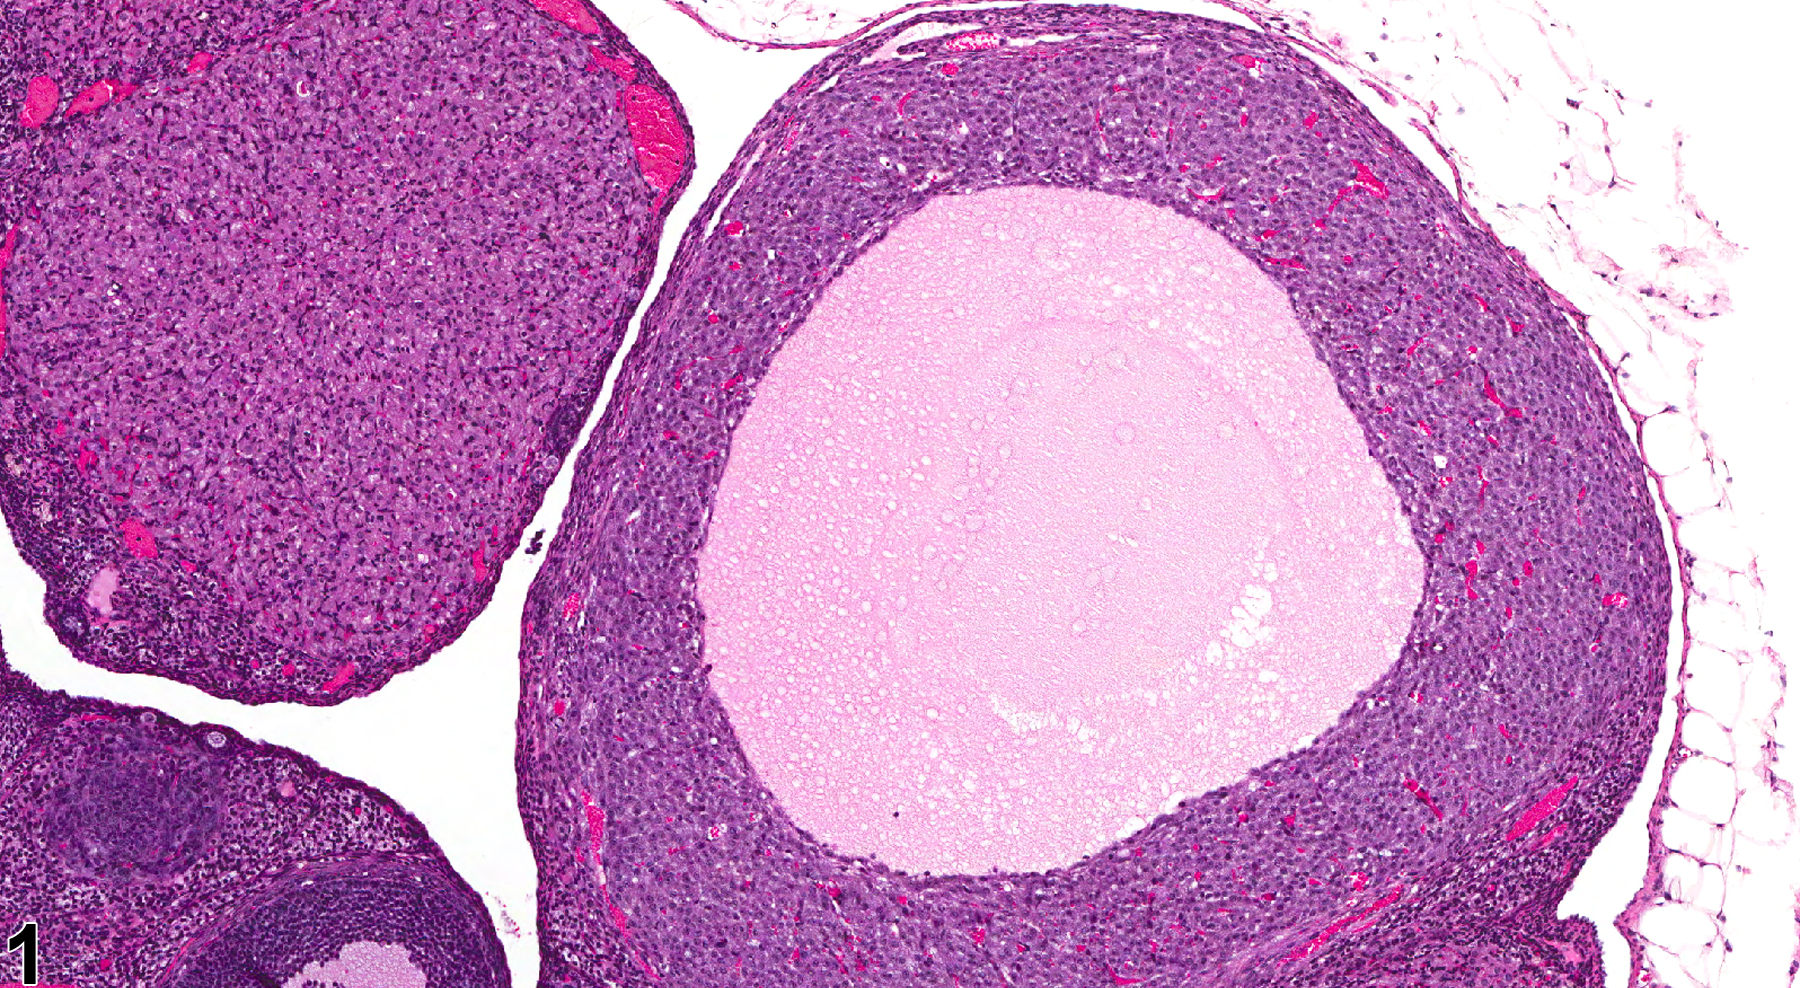 Image of corpus luteal cyst in the ovary from a female F344/N rat in a subchronic study